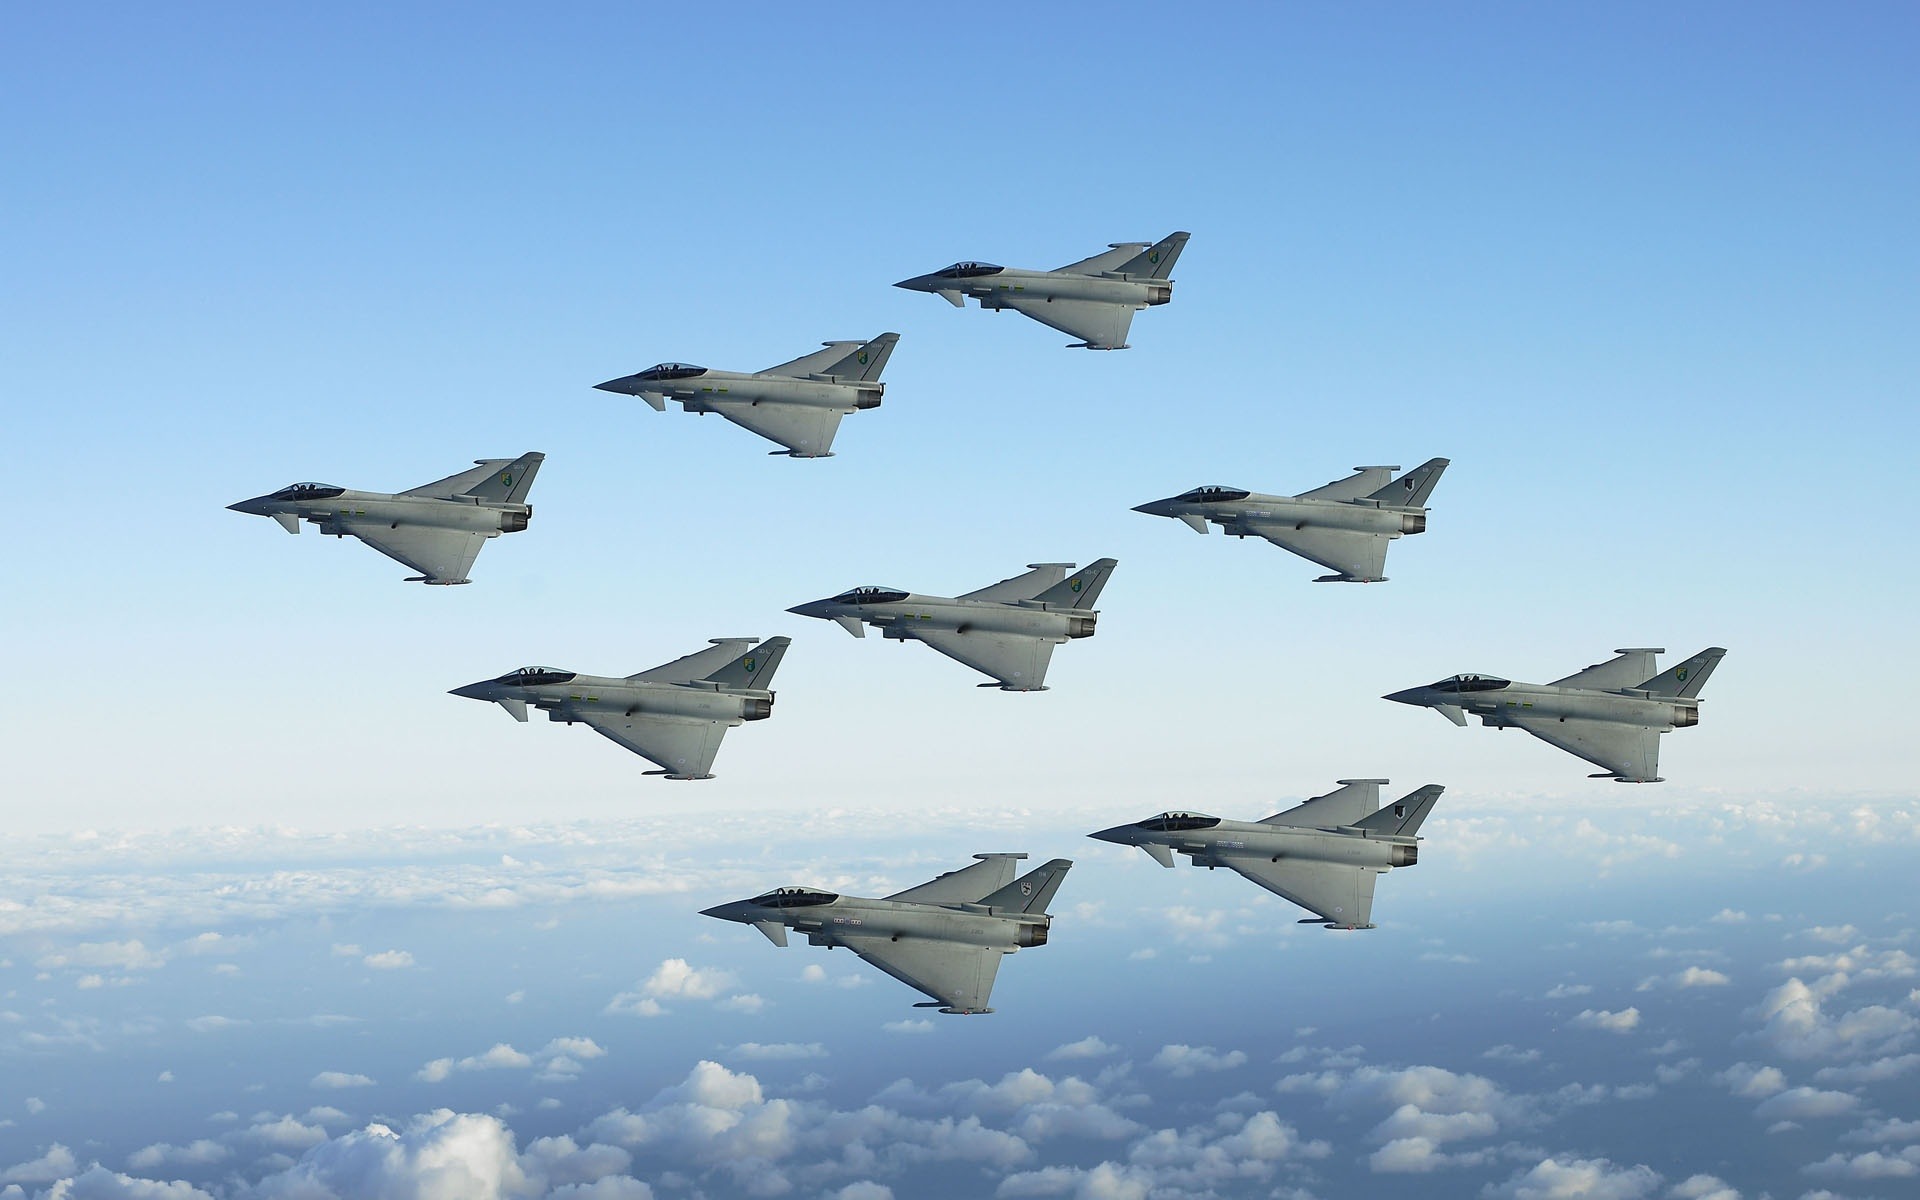 Military Fighter Jets 9641 Hd Wallpapers in Aircraft   Imagescicom 1920x1200